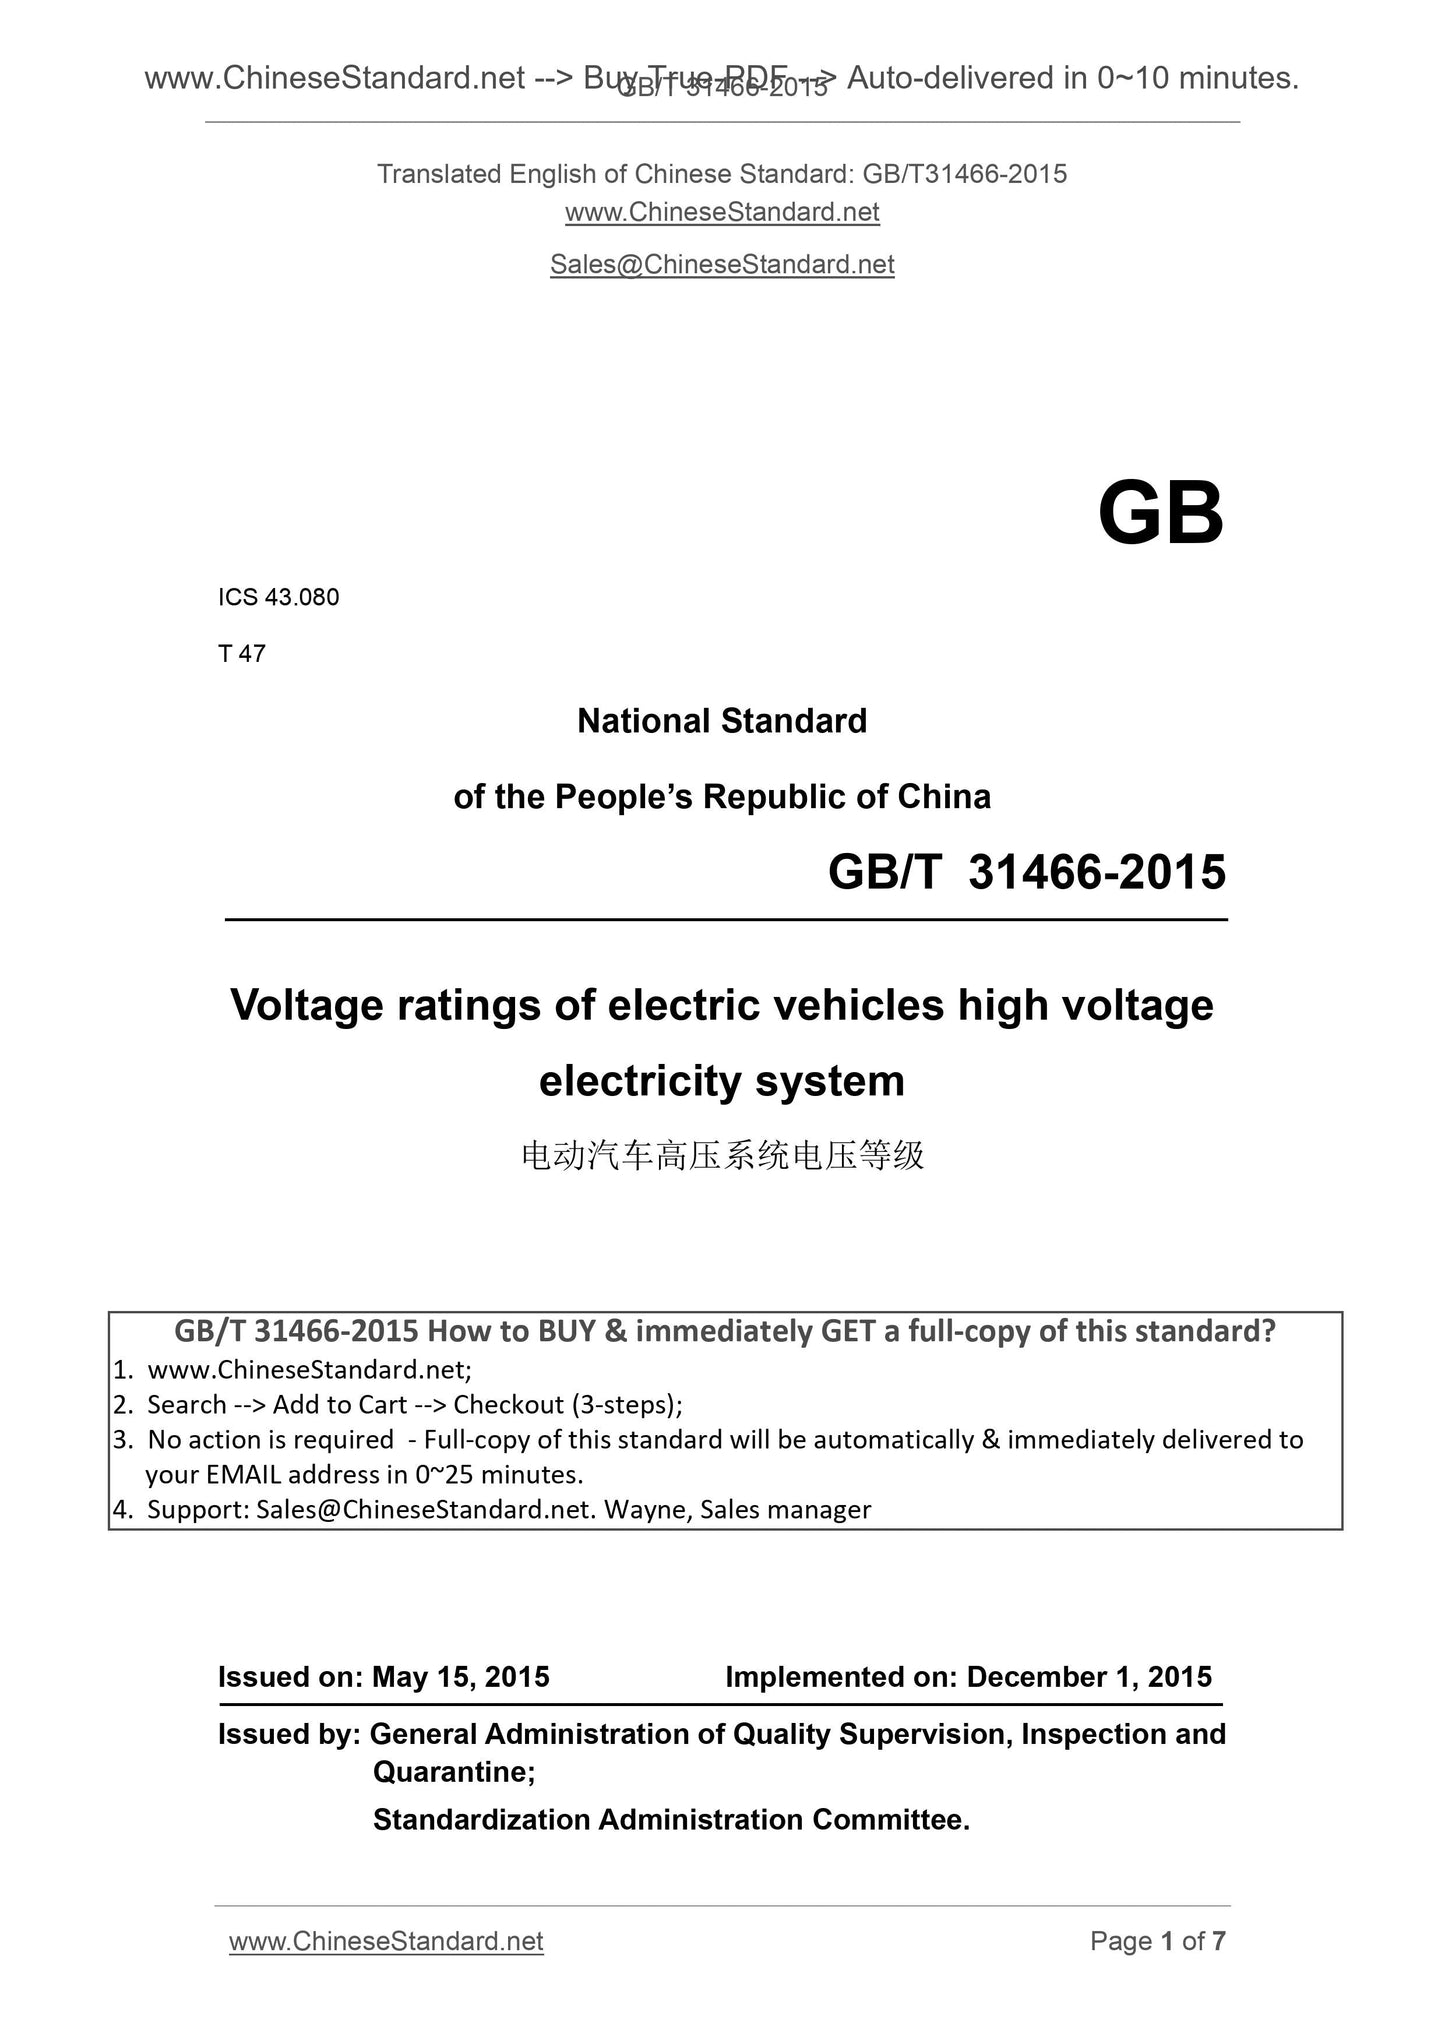 GB/T 31466-2015 Page 1